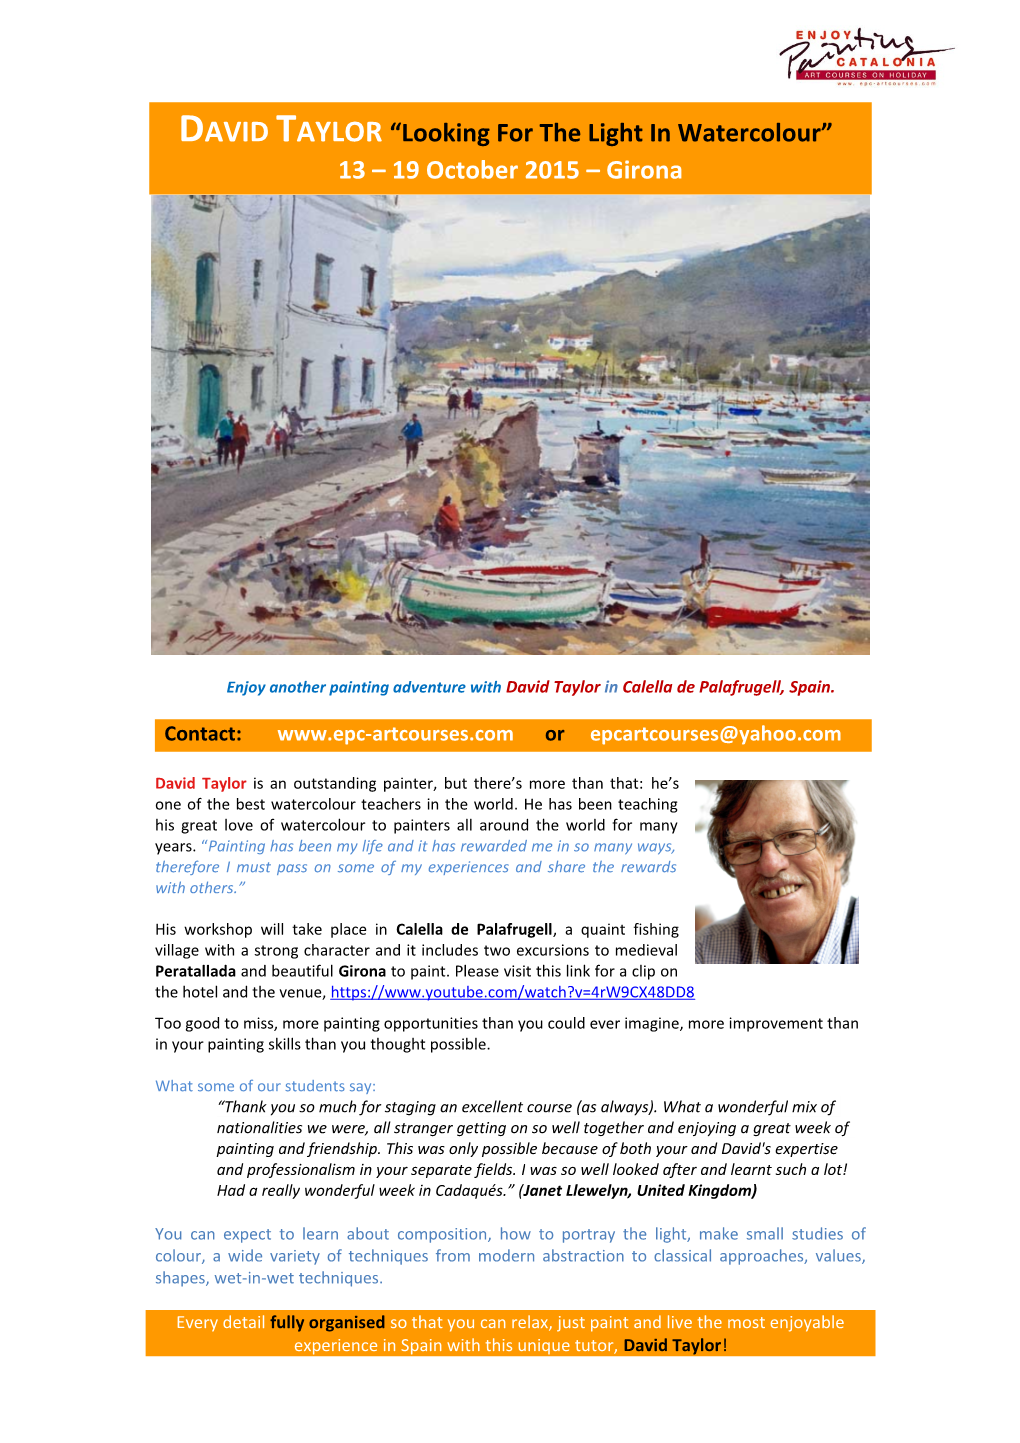 Enjoy Another Painting Adventure with David Taylor in Calella De Palafrugell, Spain